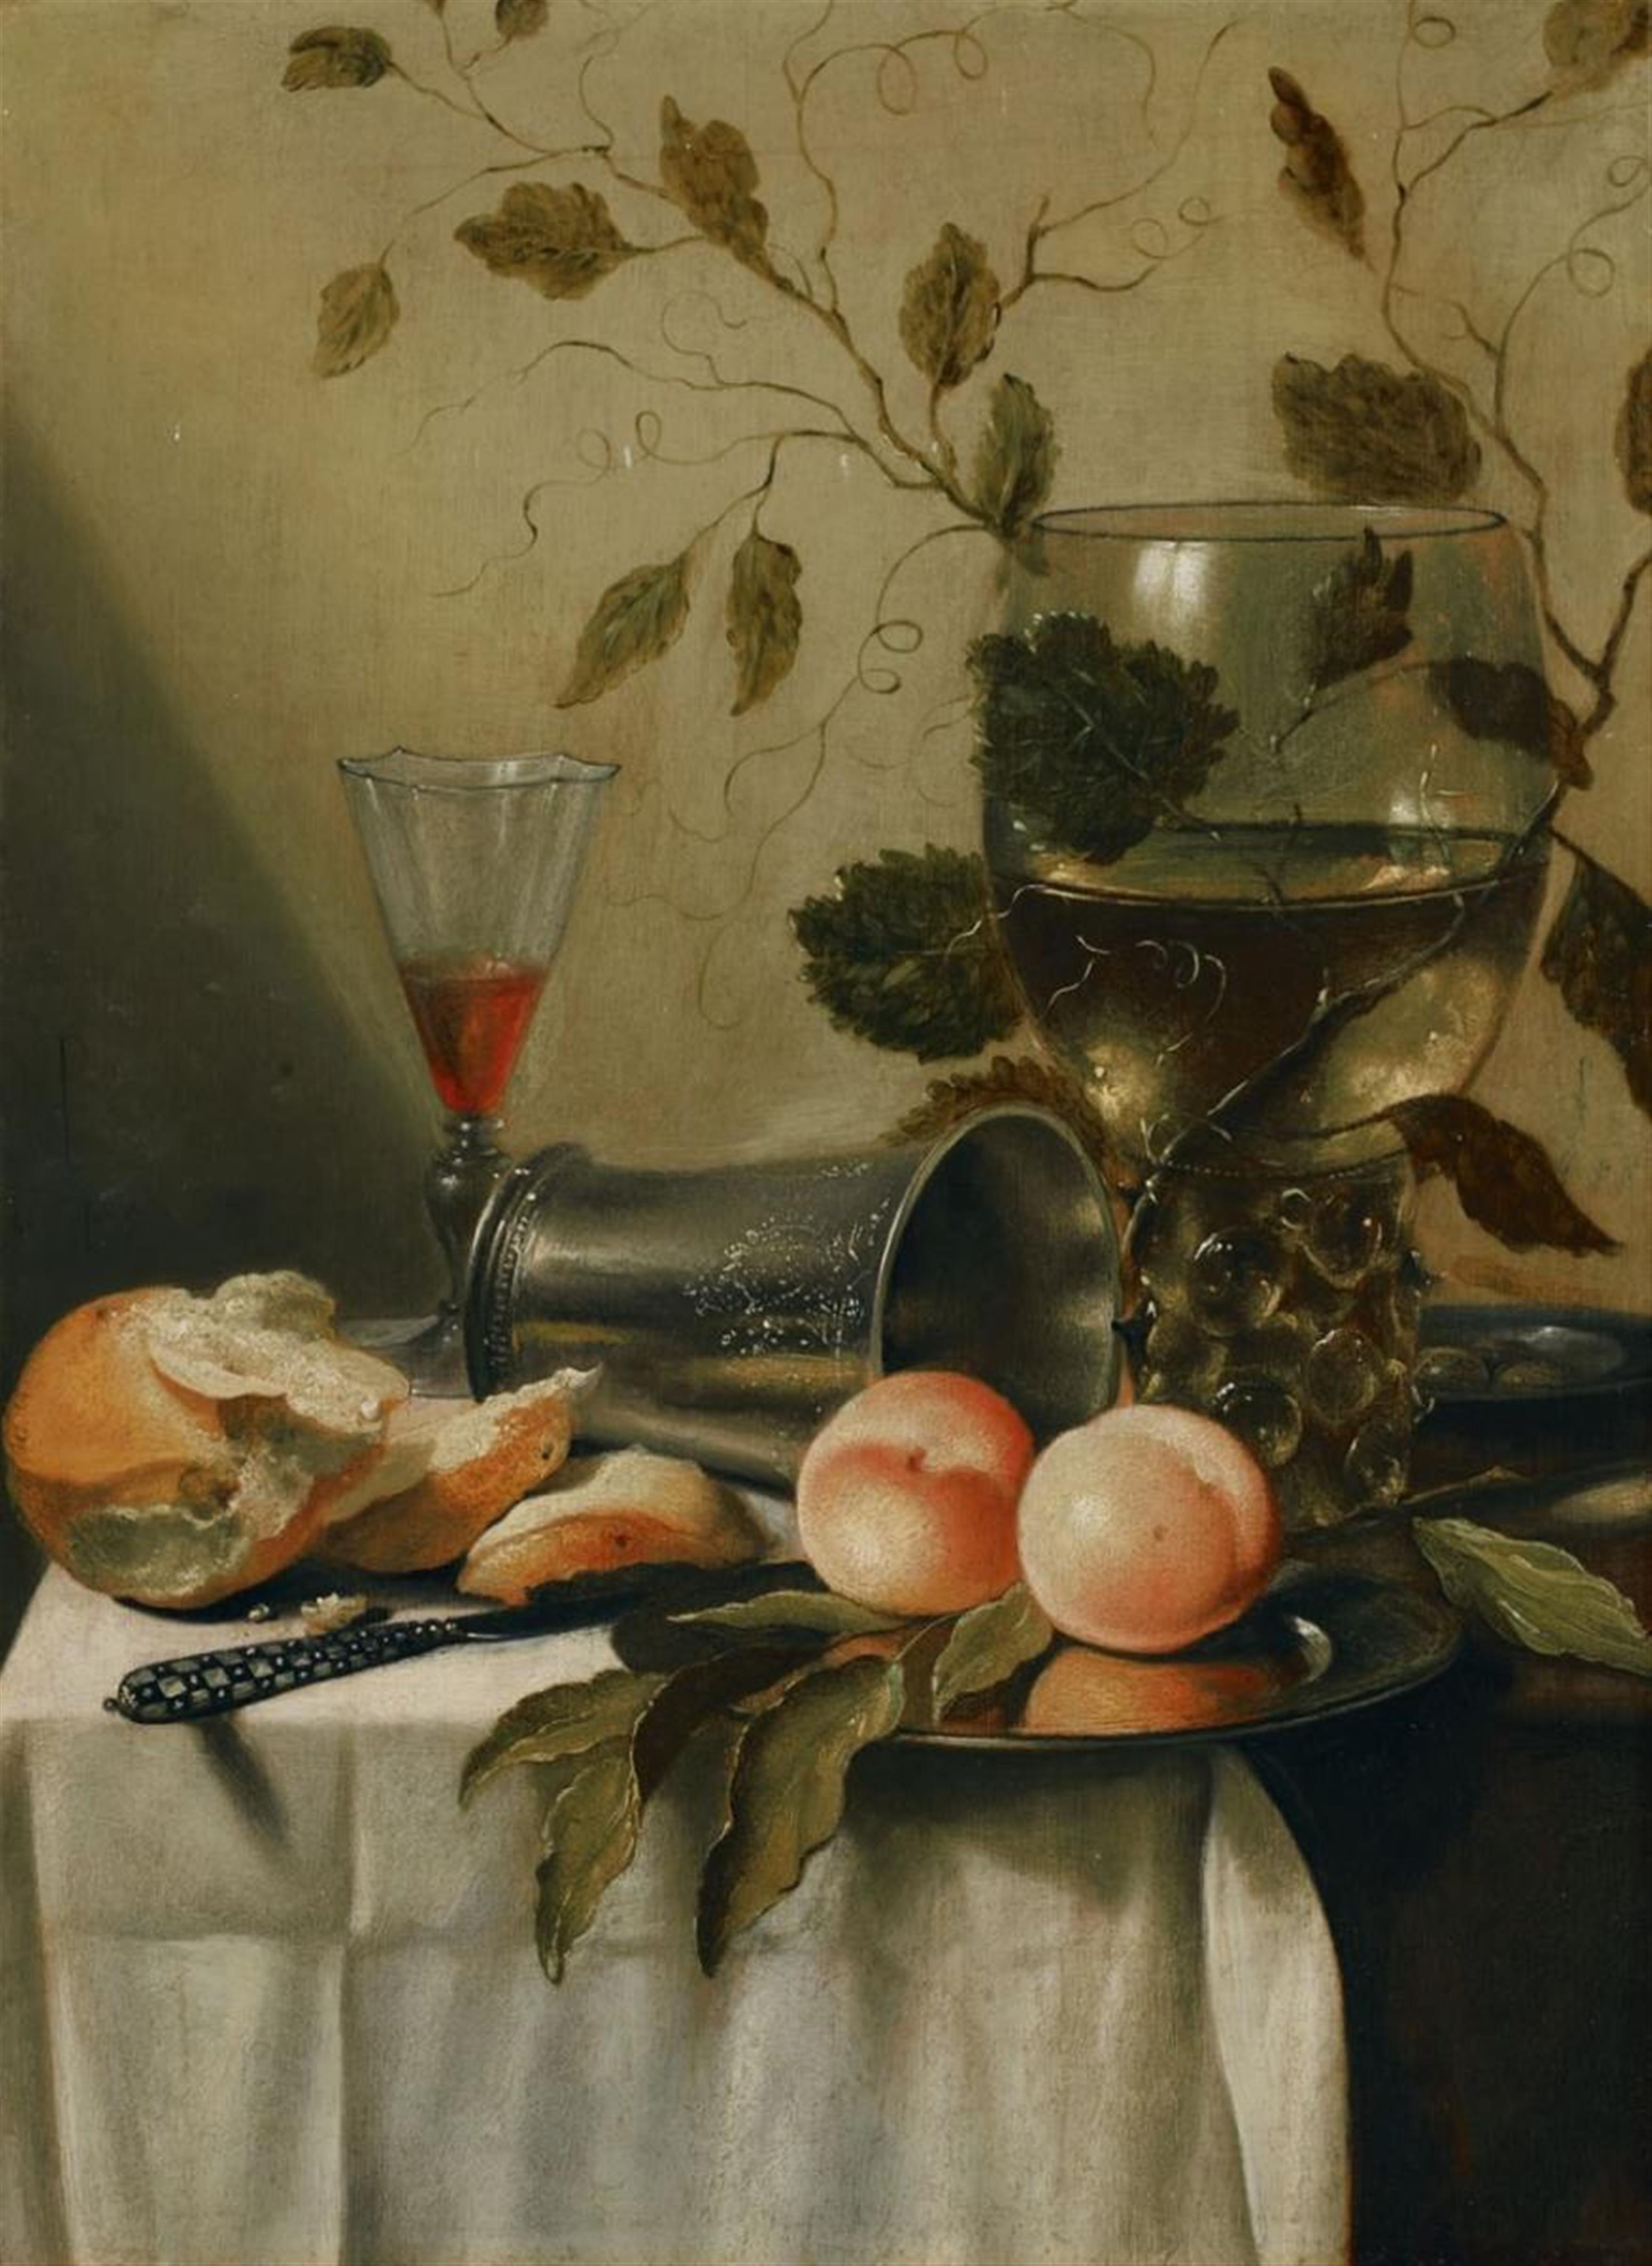 Pieter Claesz, follower of - STILL LIFE WITH GLASES, CUP, BREAD AND FRUITS - image-1